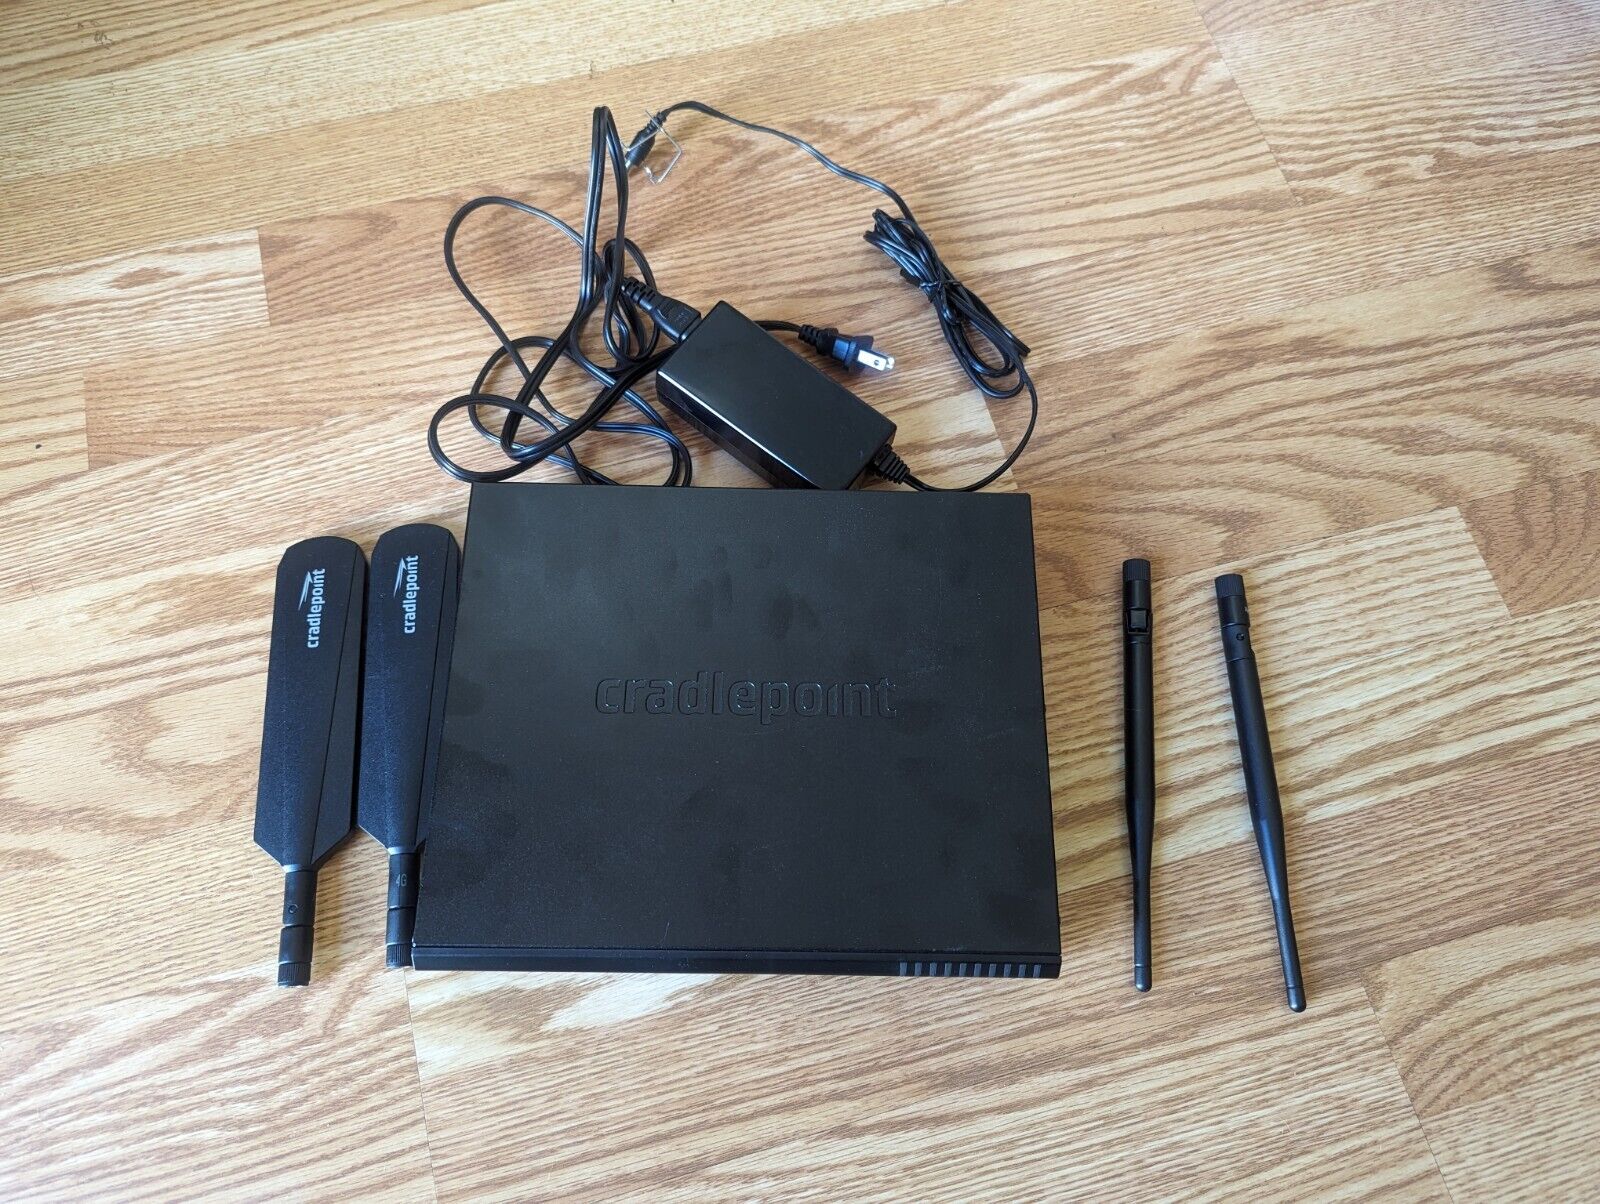 Cradlepoint AER2100 4G LTE Wireless Cellular Router w/ adapter & antenna